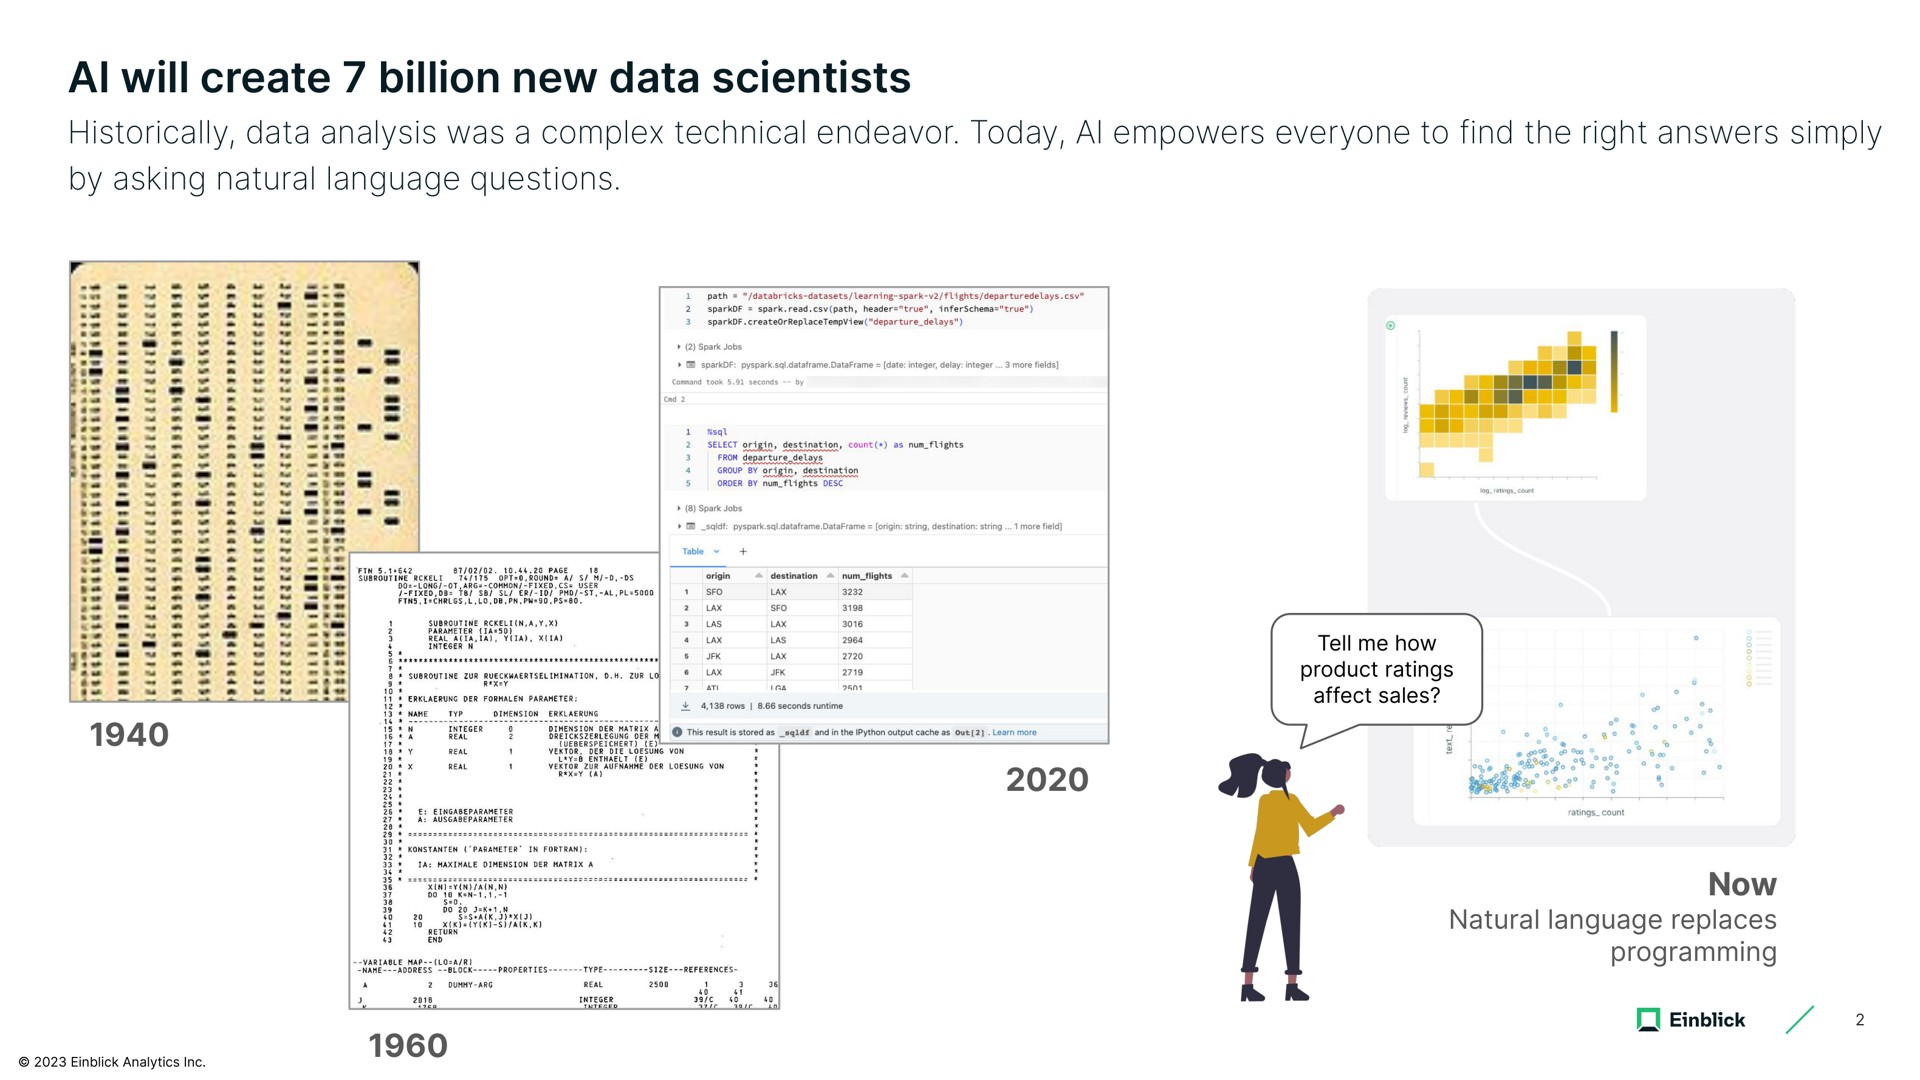 will create billion new data scientists historically analysis was a complex technical endeavor today empowers everyone to find the right answers simply by asking natural language questions now | Einblick